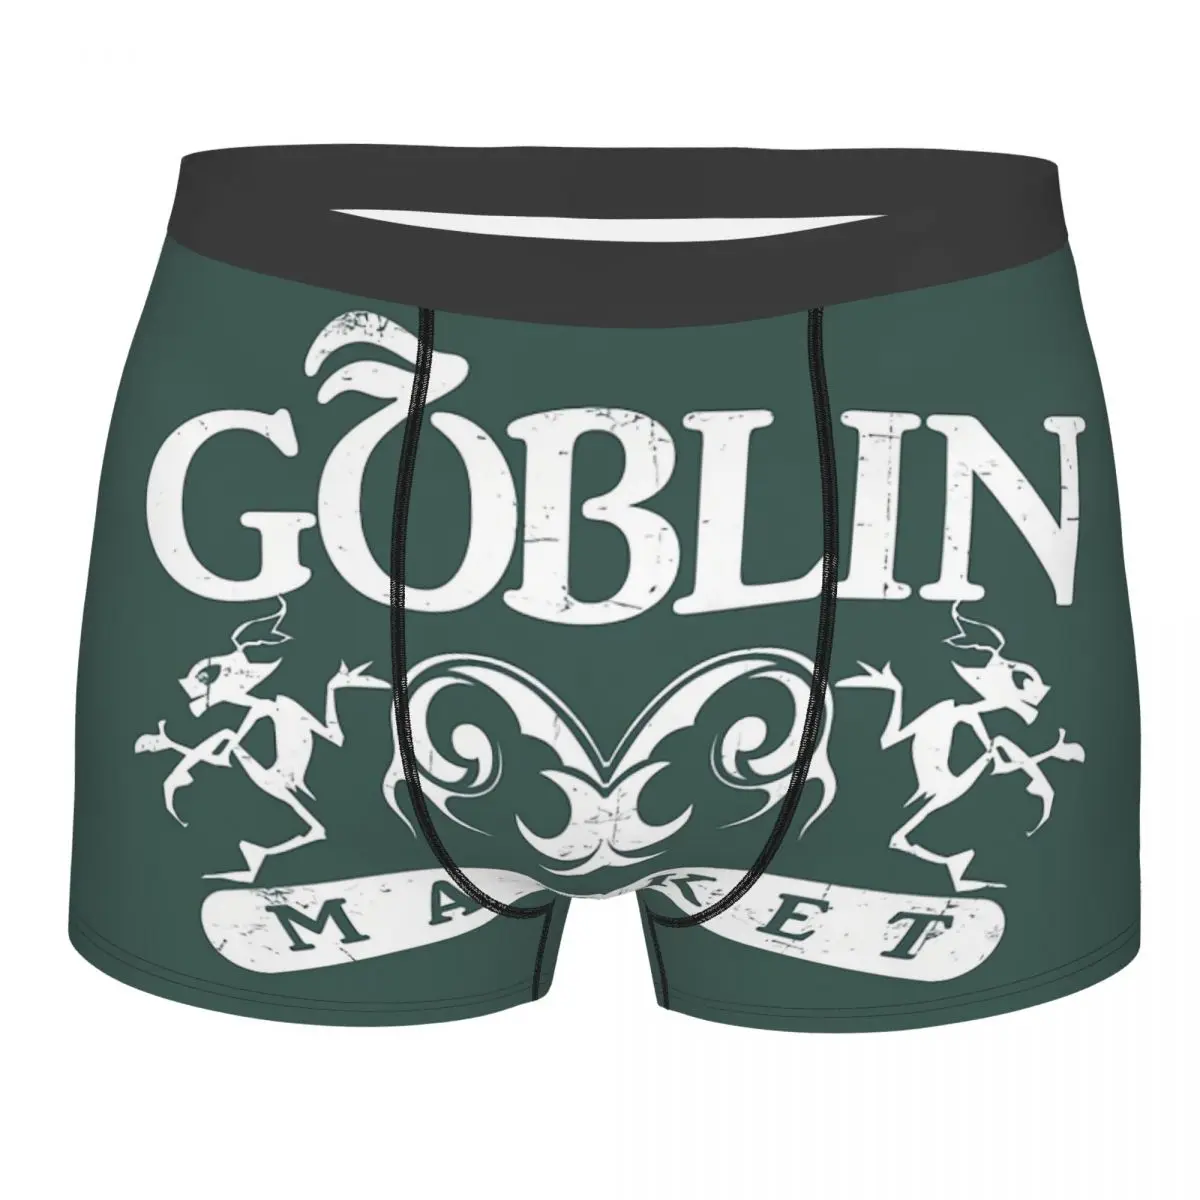 

Goblin Market Man's Boxer Briefs DnD Game Highly Breathable Underpants High Quality Print Shorts Gift Idea